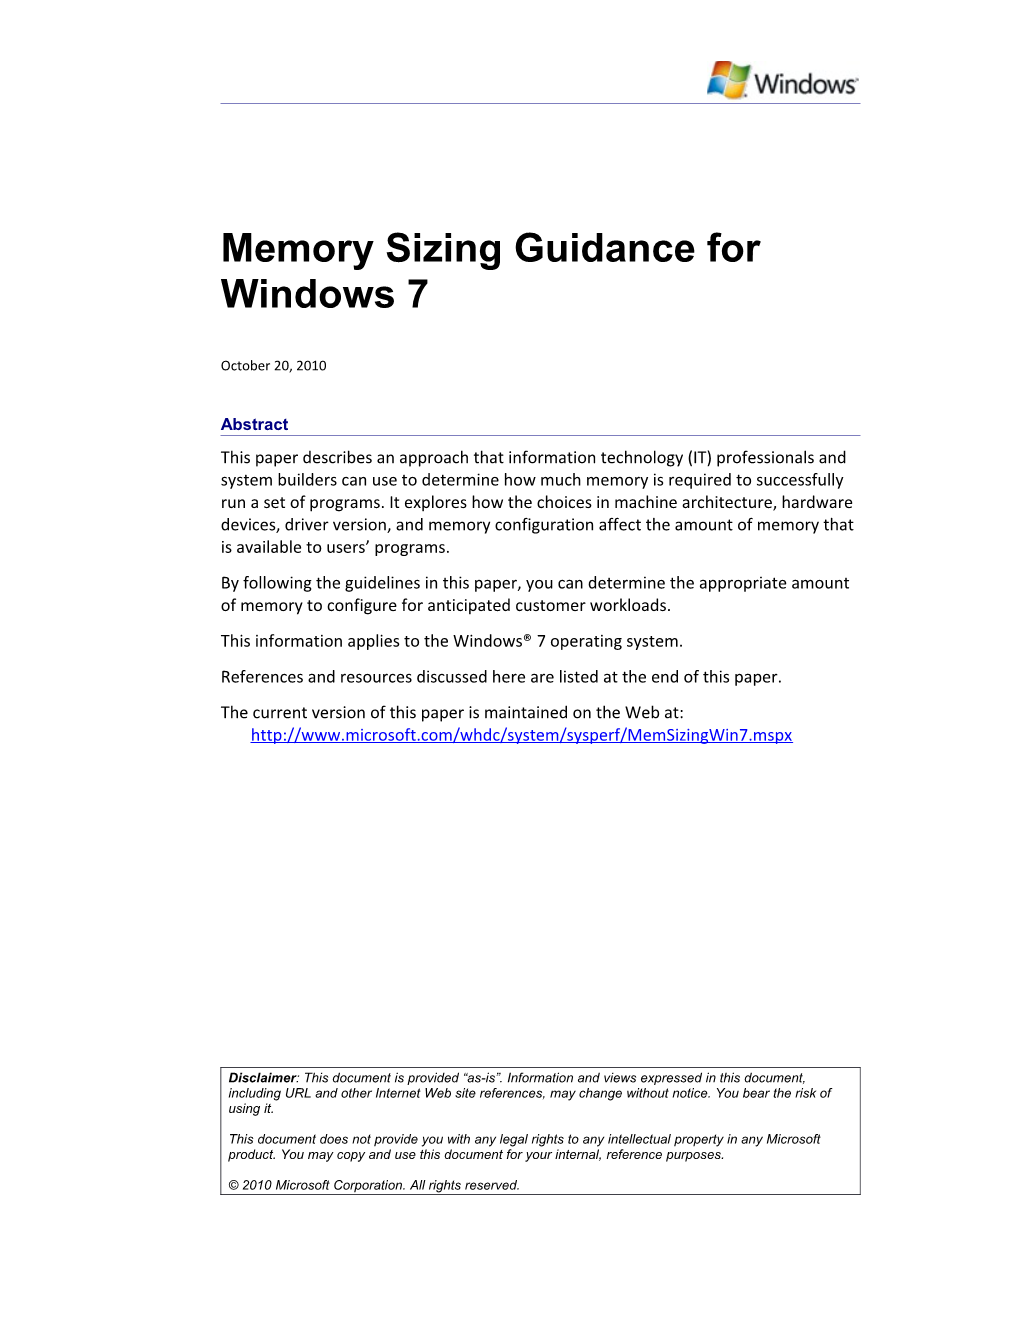 Memory Sizing Guidance for Windows 7 - 1